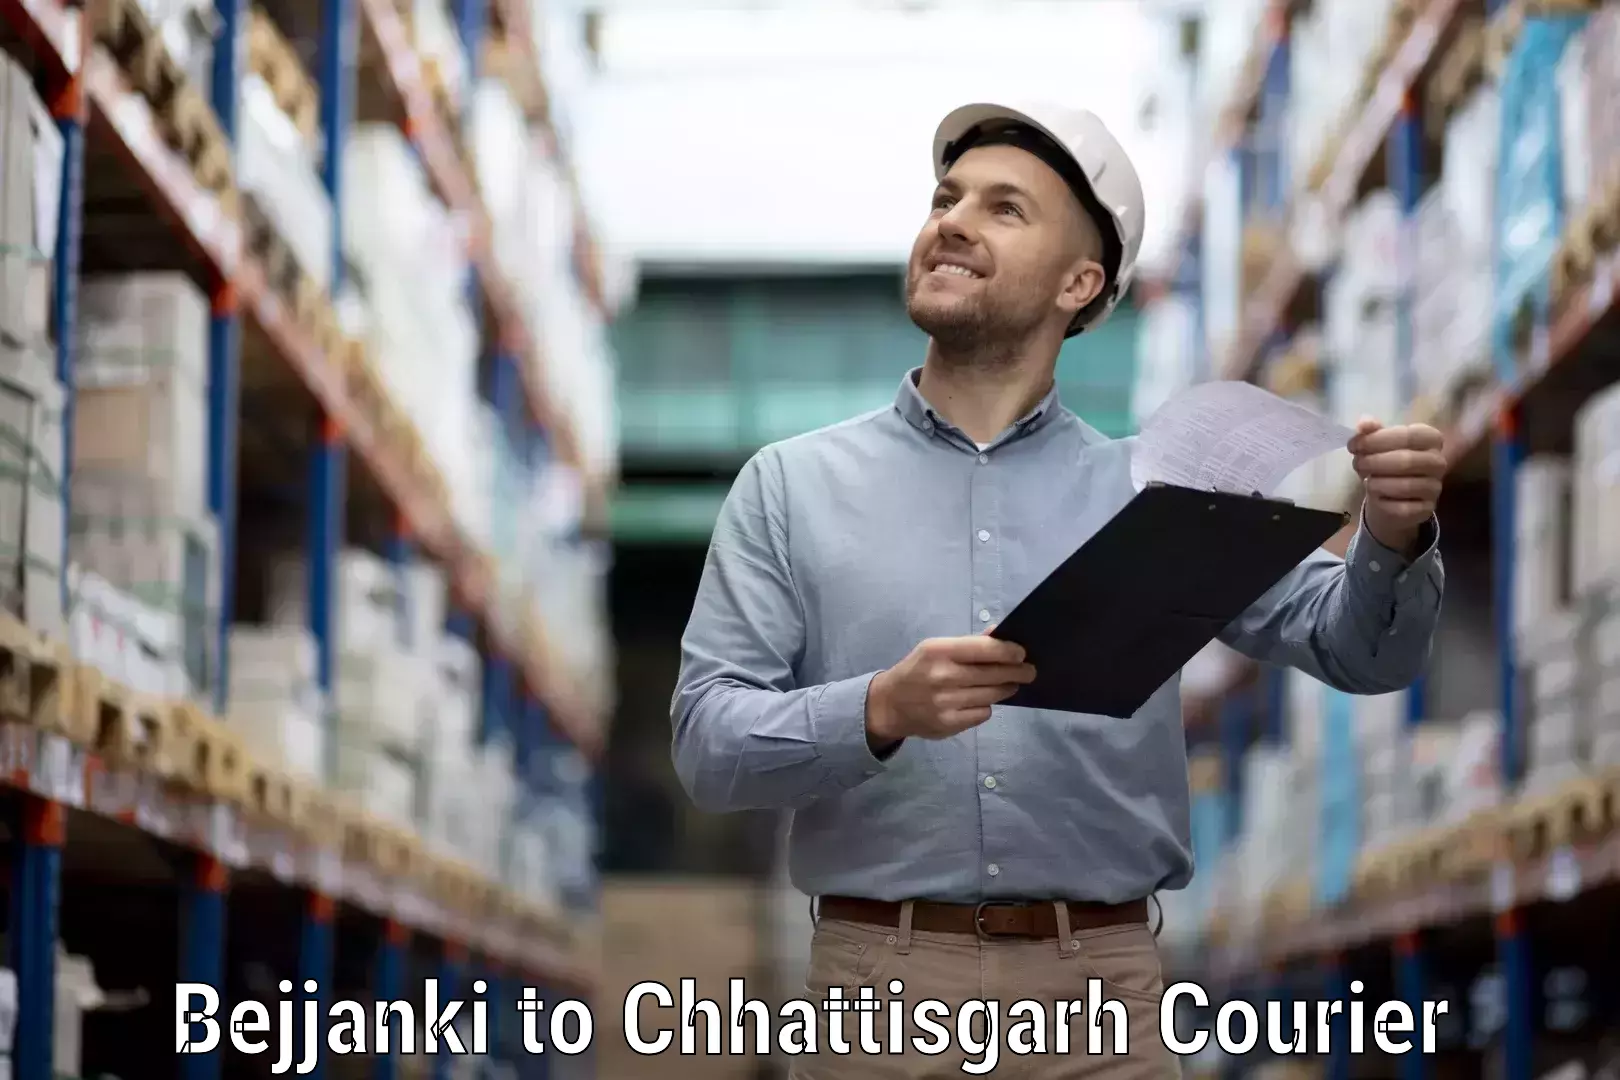 Courier service comparison in Bejjanki to Dharamjaigarh